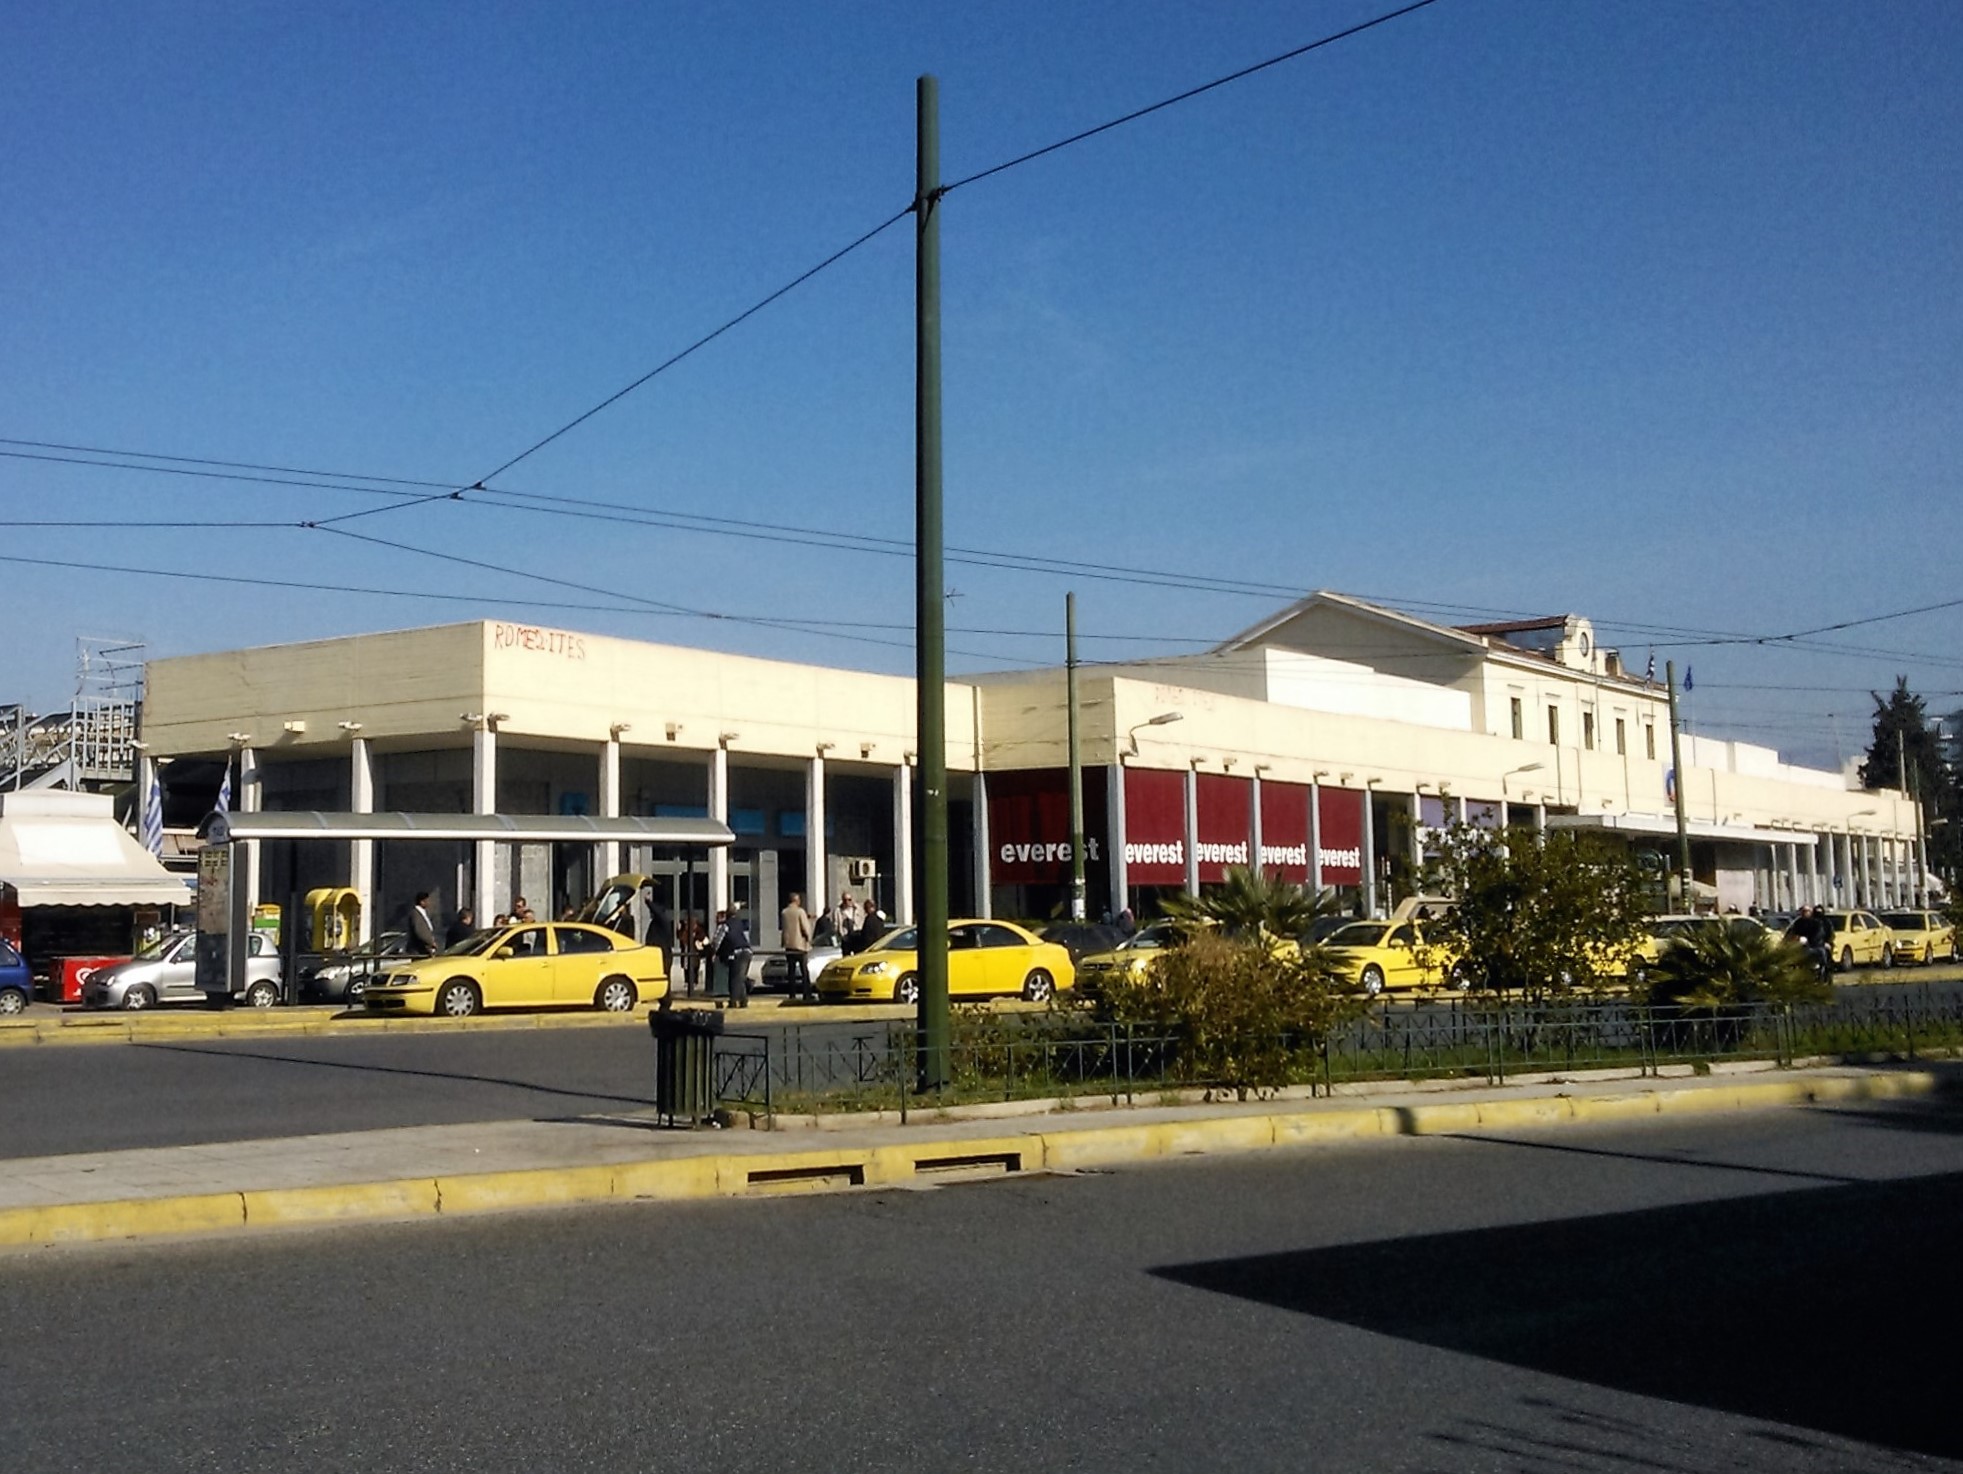 Athens Railway Station in second phase of renovation